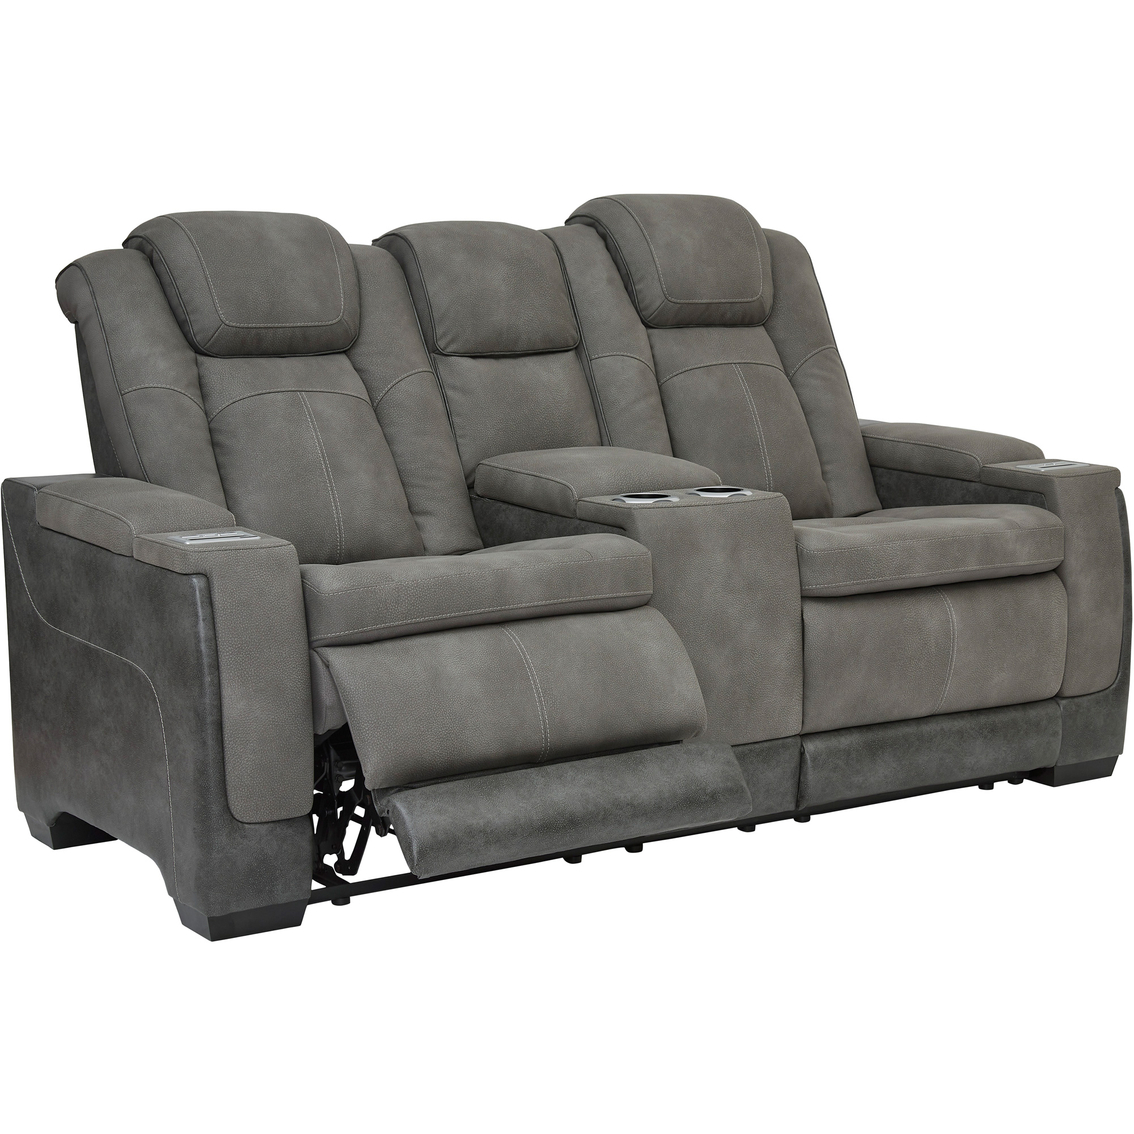 Signature Design by Ashley Next Gen DuraPella Power Reclining Loveseat with Console - Image 3 of 10